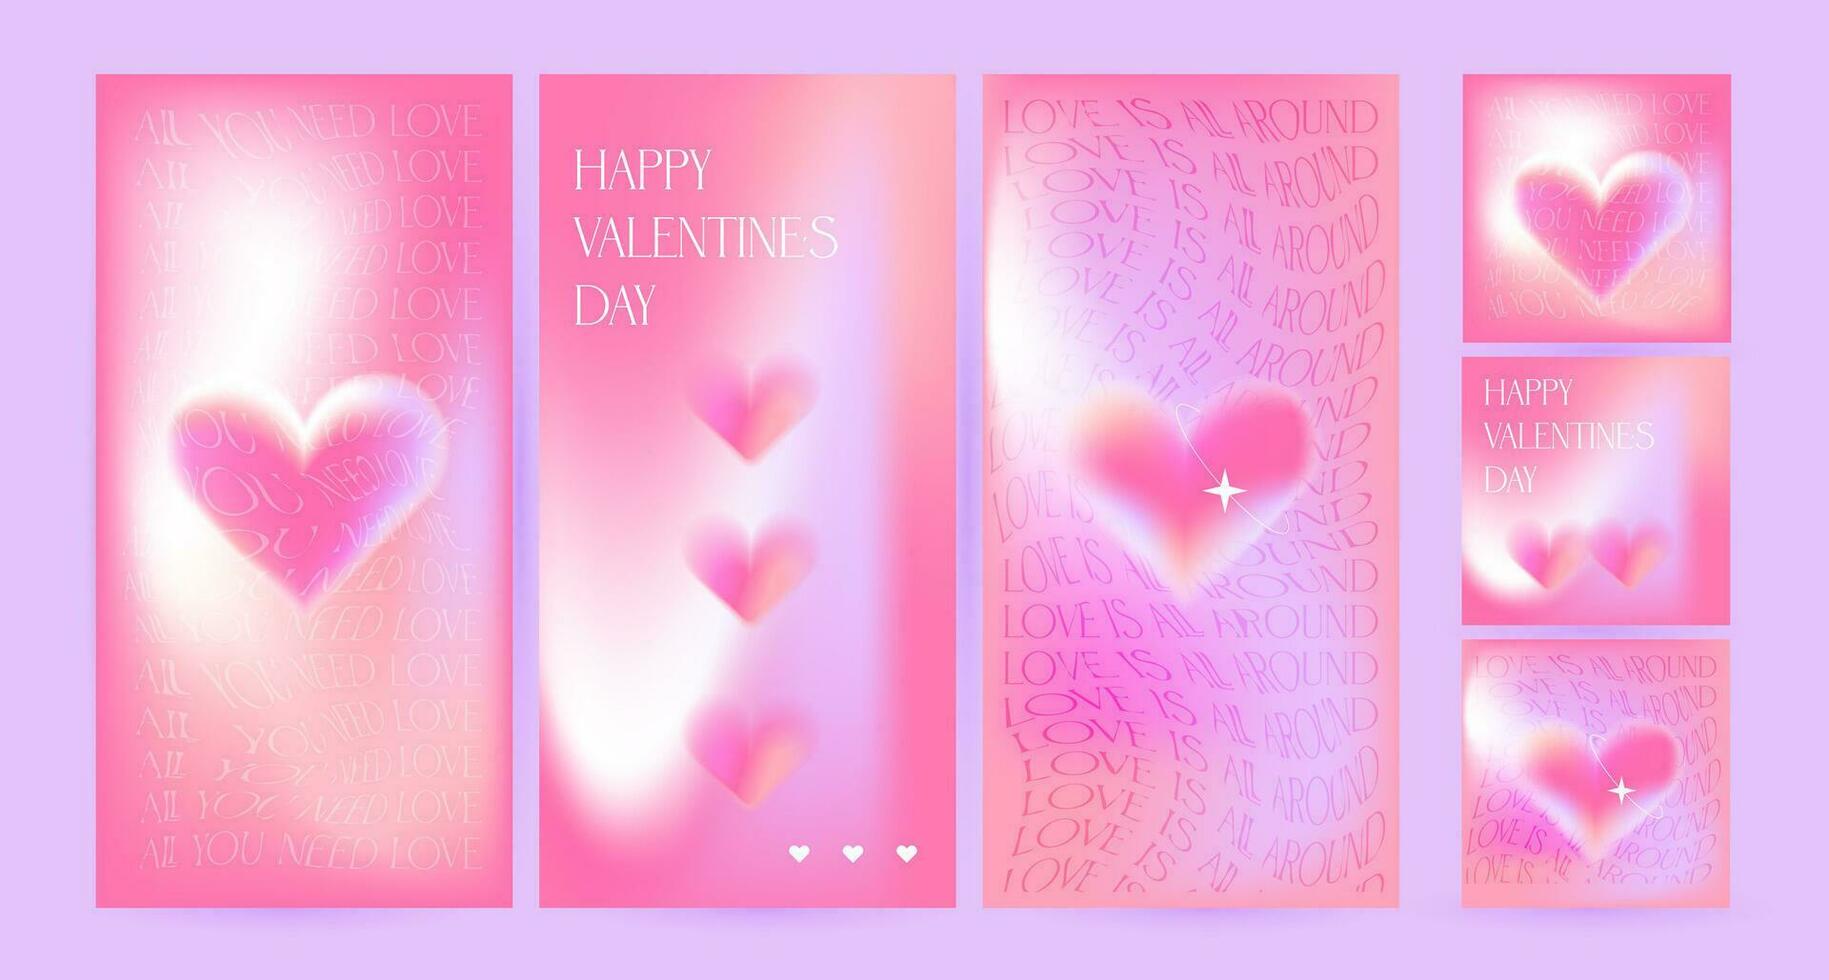 Y2k Trendy Aesthetic abstract gradient pink social media backgrounds set with translucent aura hearts and blurred pattern. Covers, stories highlight template for digital marketing. Vector eps10 design